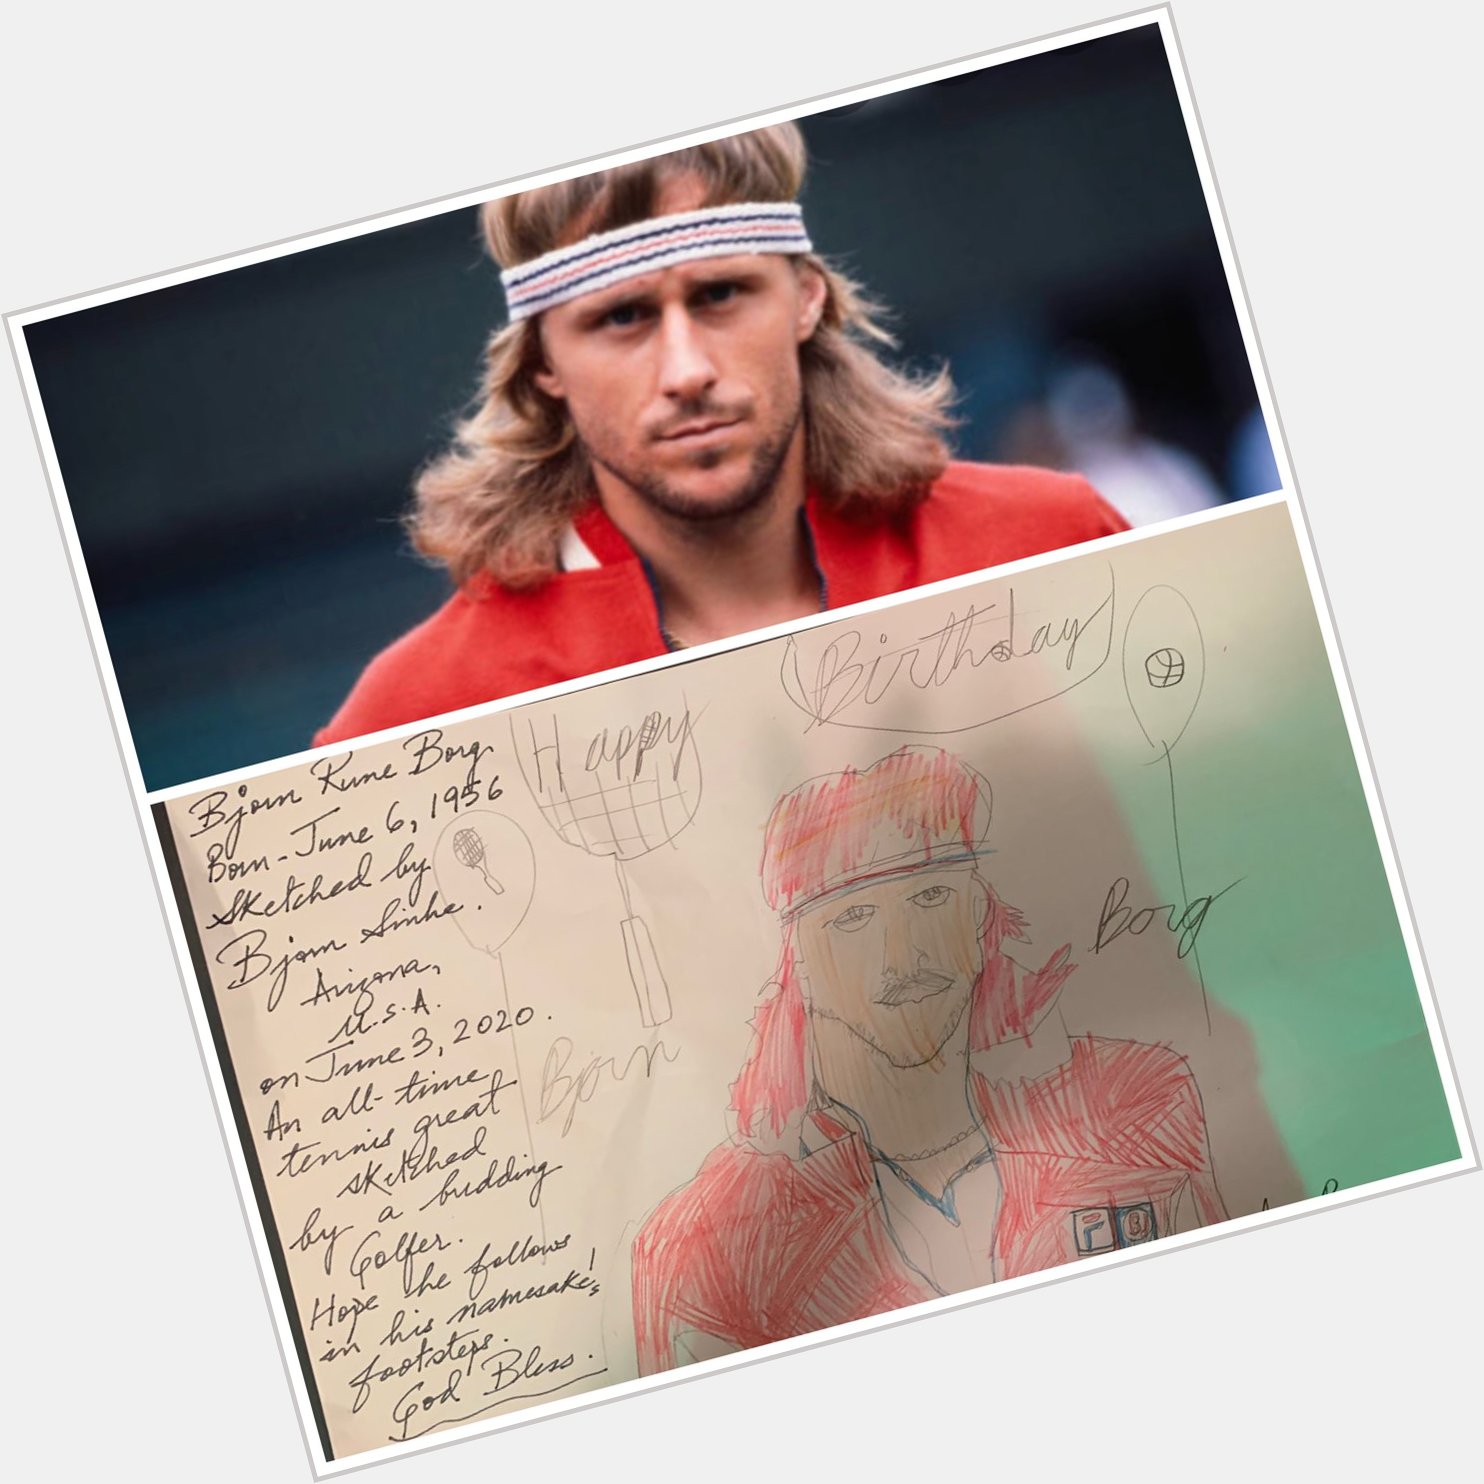  A very Happy Birthday Bjorn Borg. Here s my son Bjorn s sketch for you on your 64th birthday. 